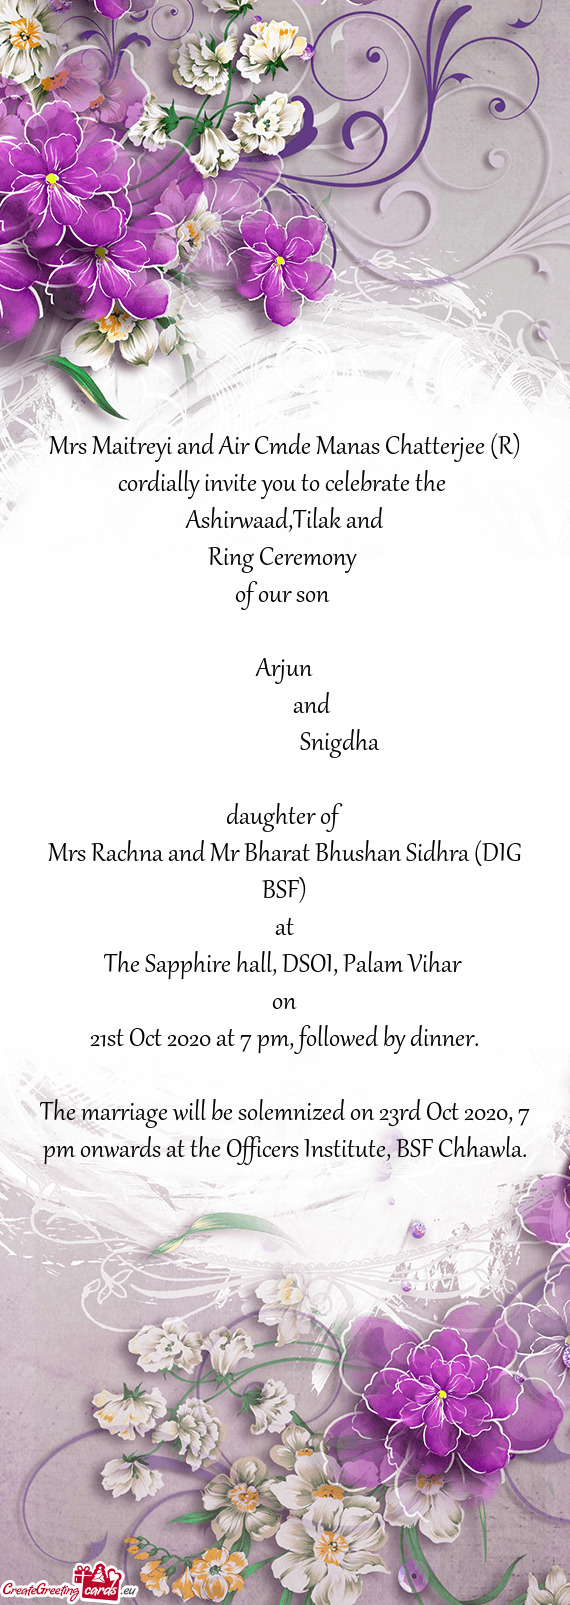 21st Oct 2020 at 7 pm, followed by dinner